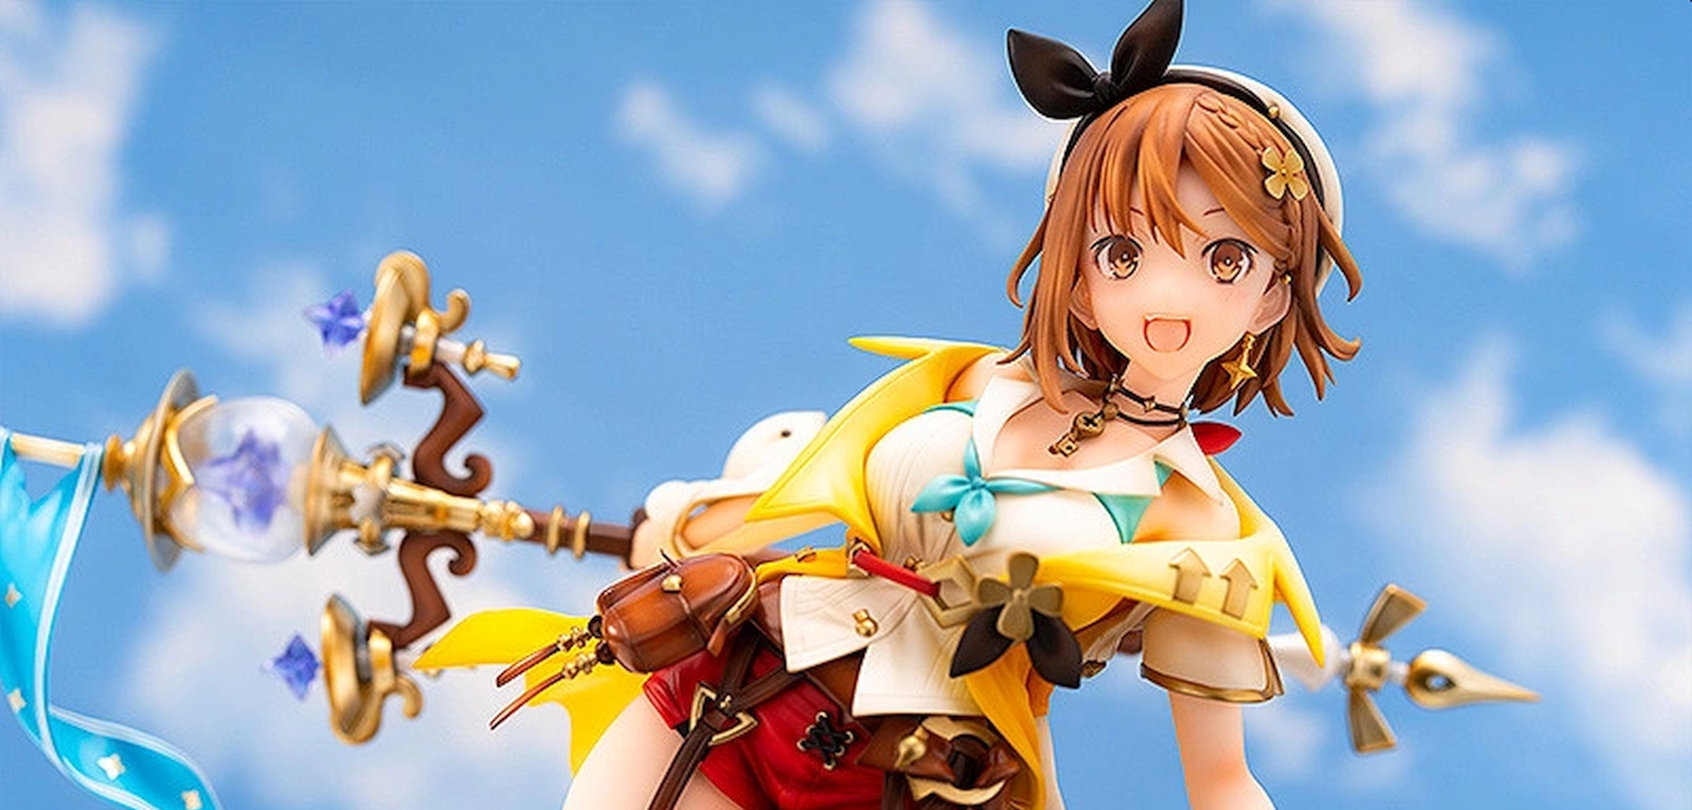 Atelier Ryza’s Sequel Appearance Now A Detailed Figure From Good Smile Company